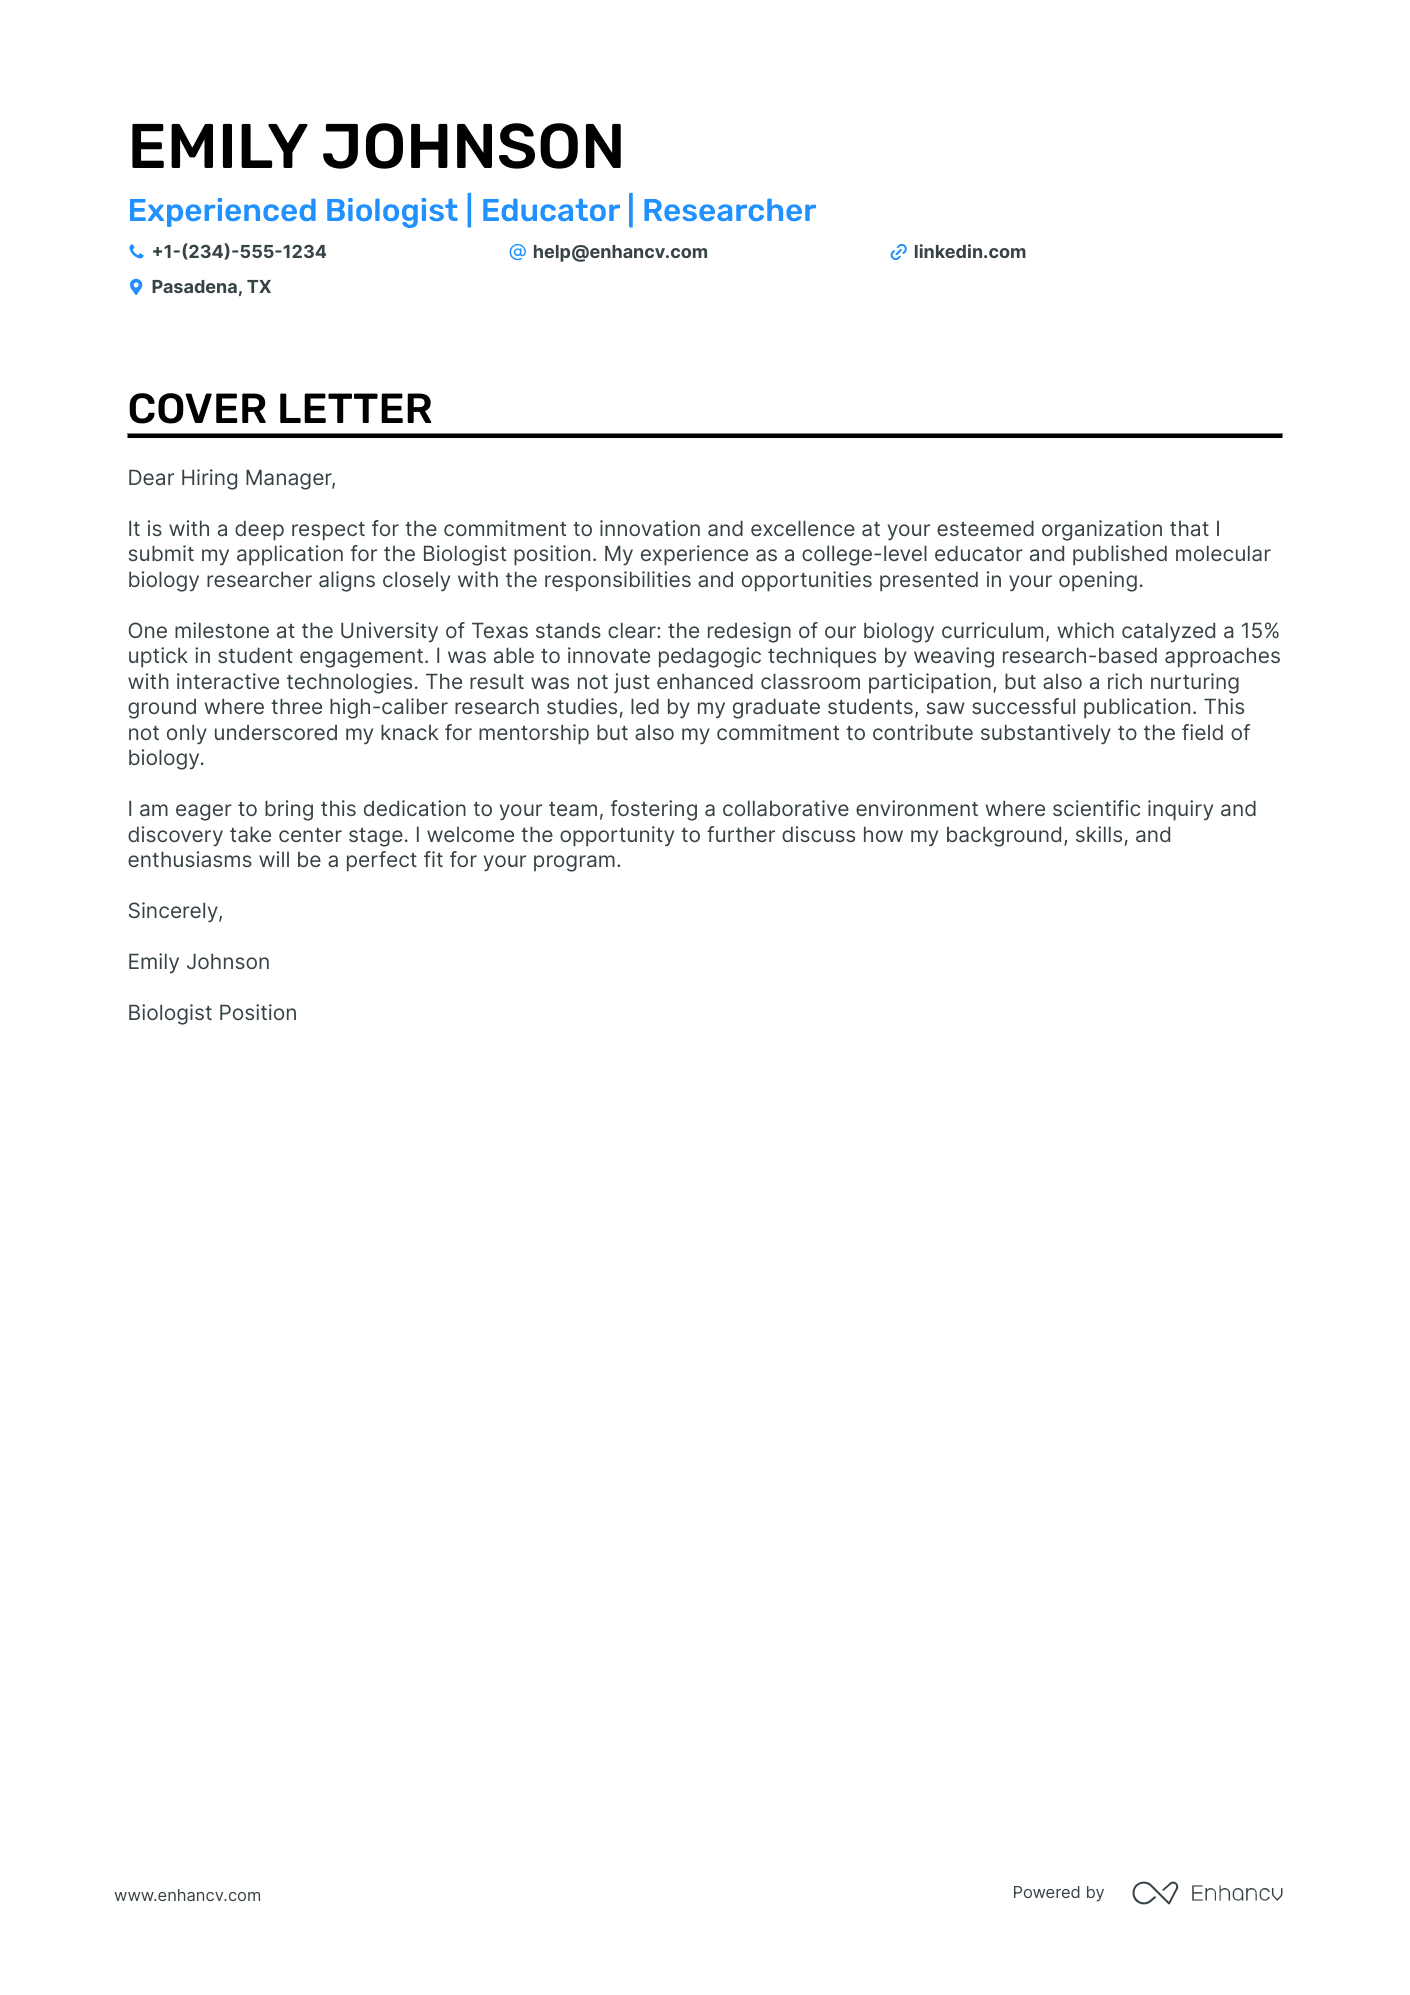 cover letter for assistant research scientist